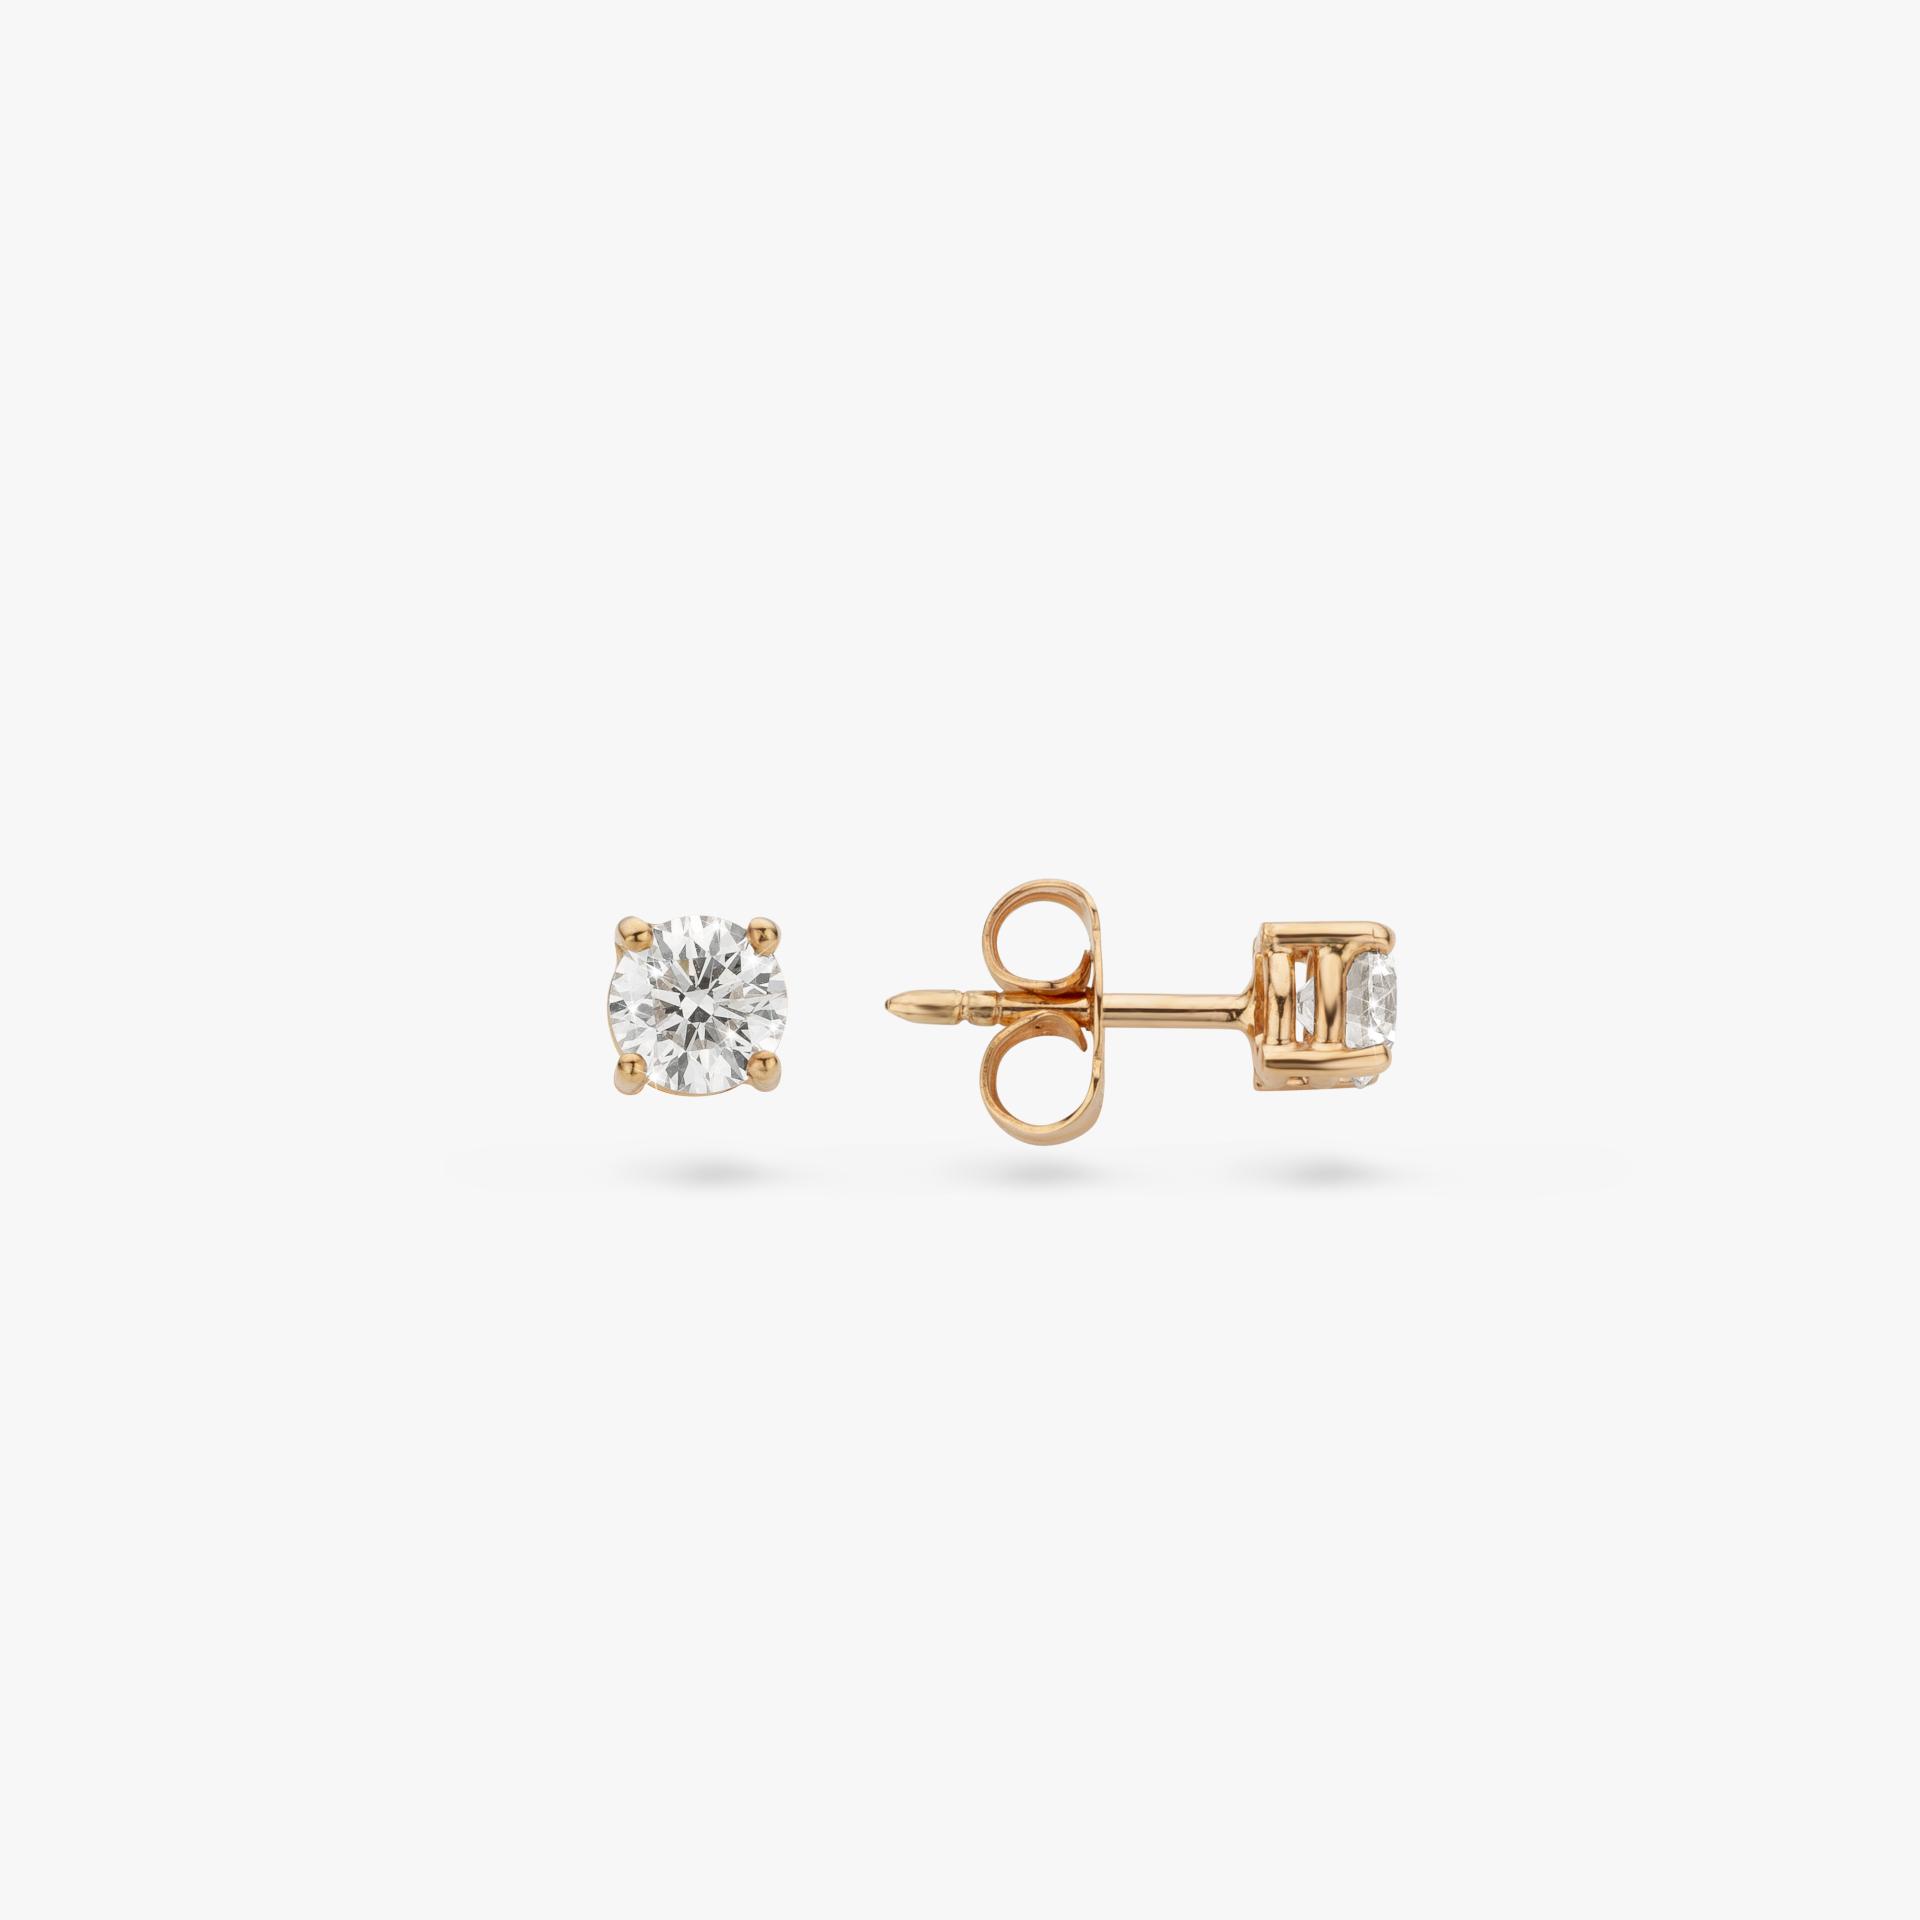 Rose gold earrings set with a brilliant shaped diamond made by Maison De Greef